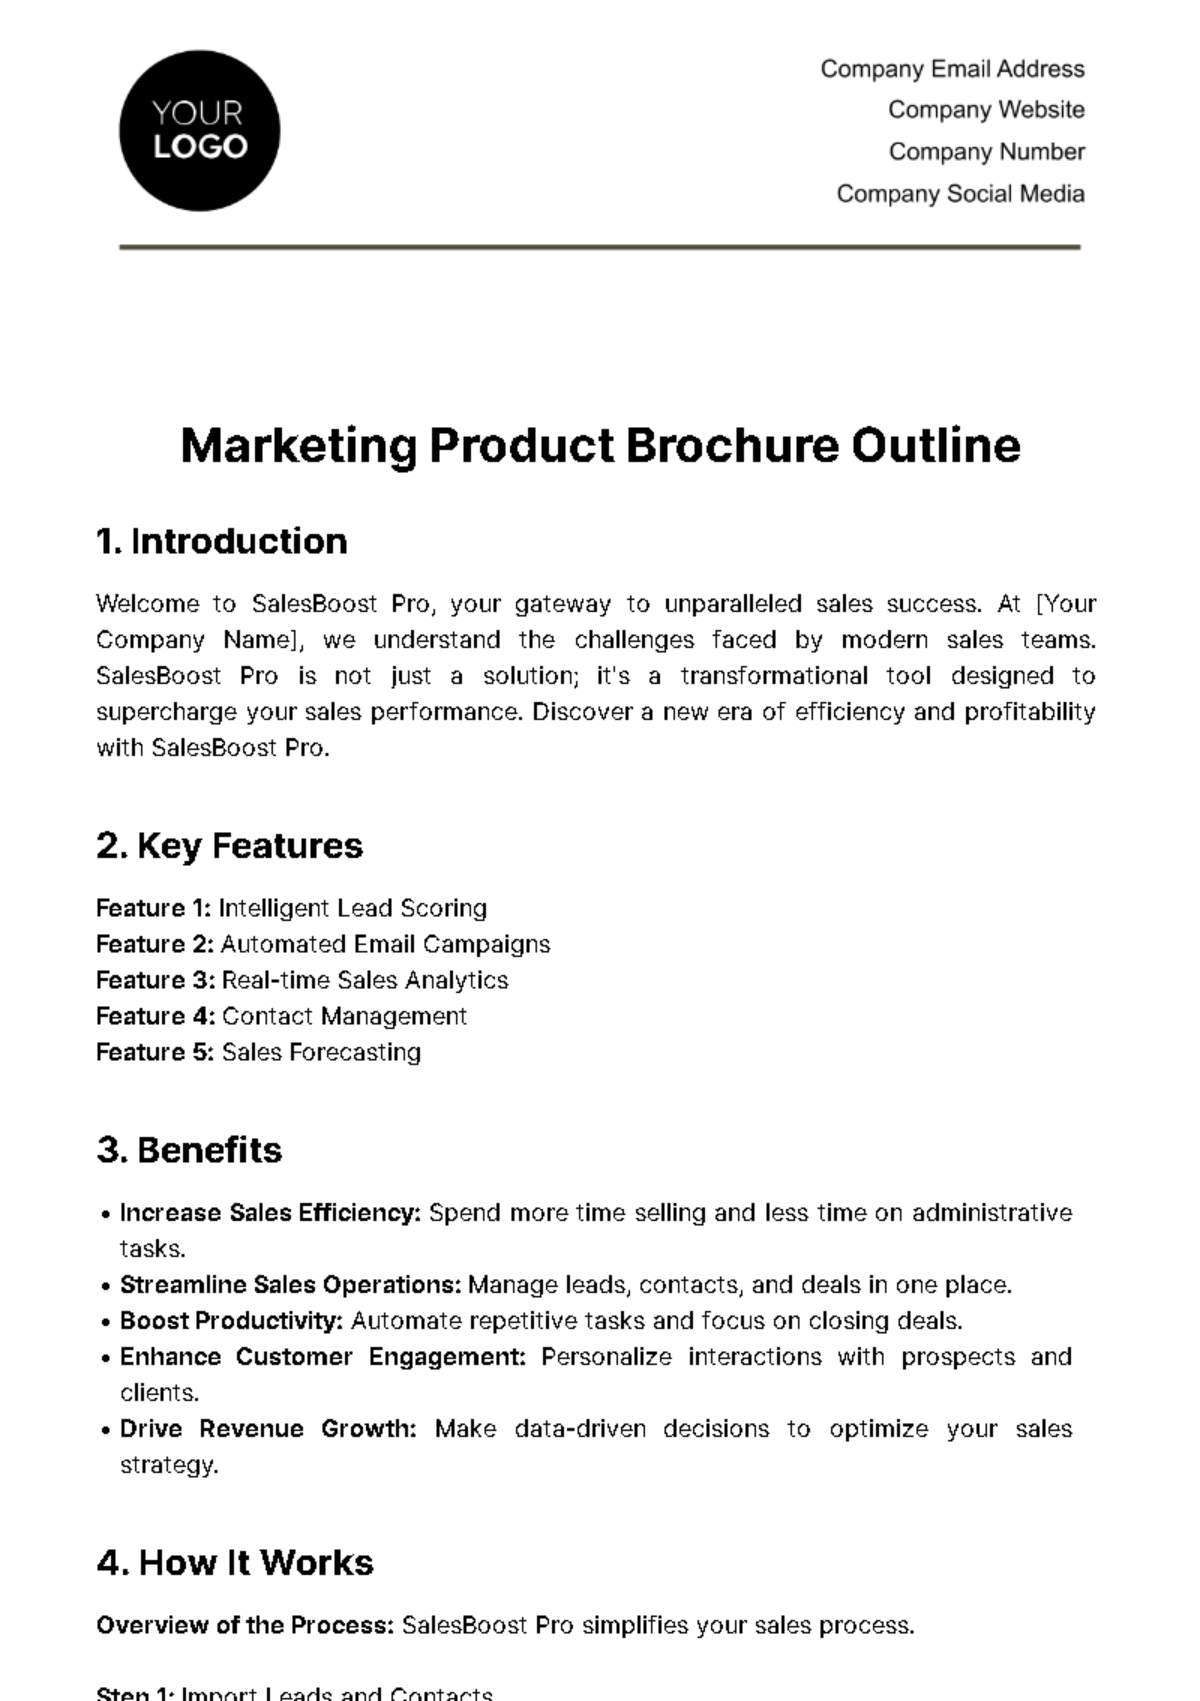 Free Marketing Product Brochure Outline Template